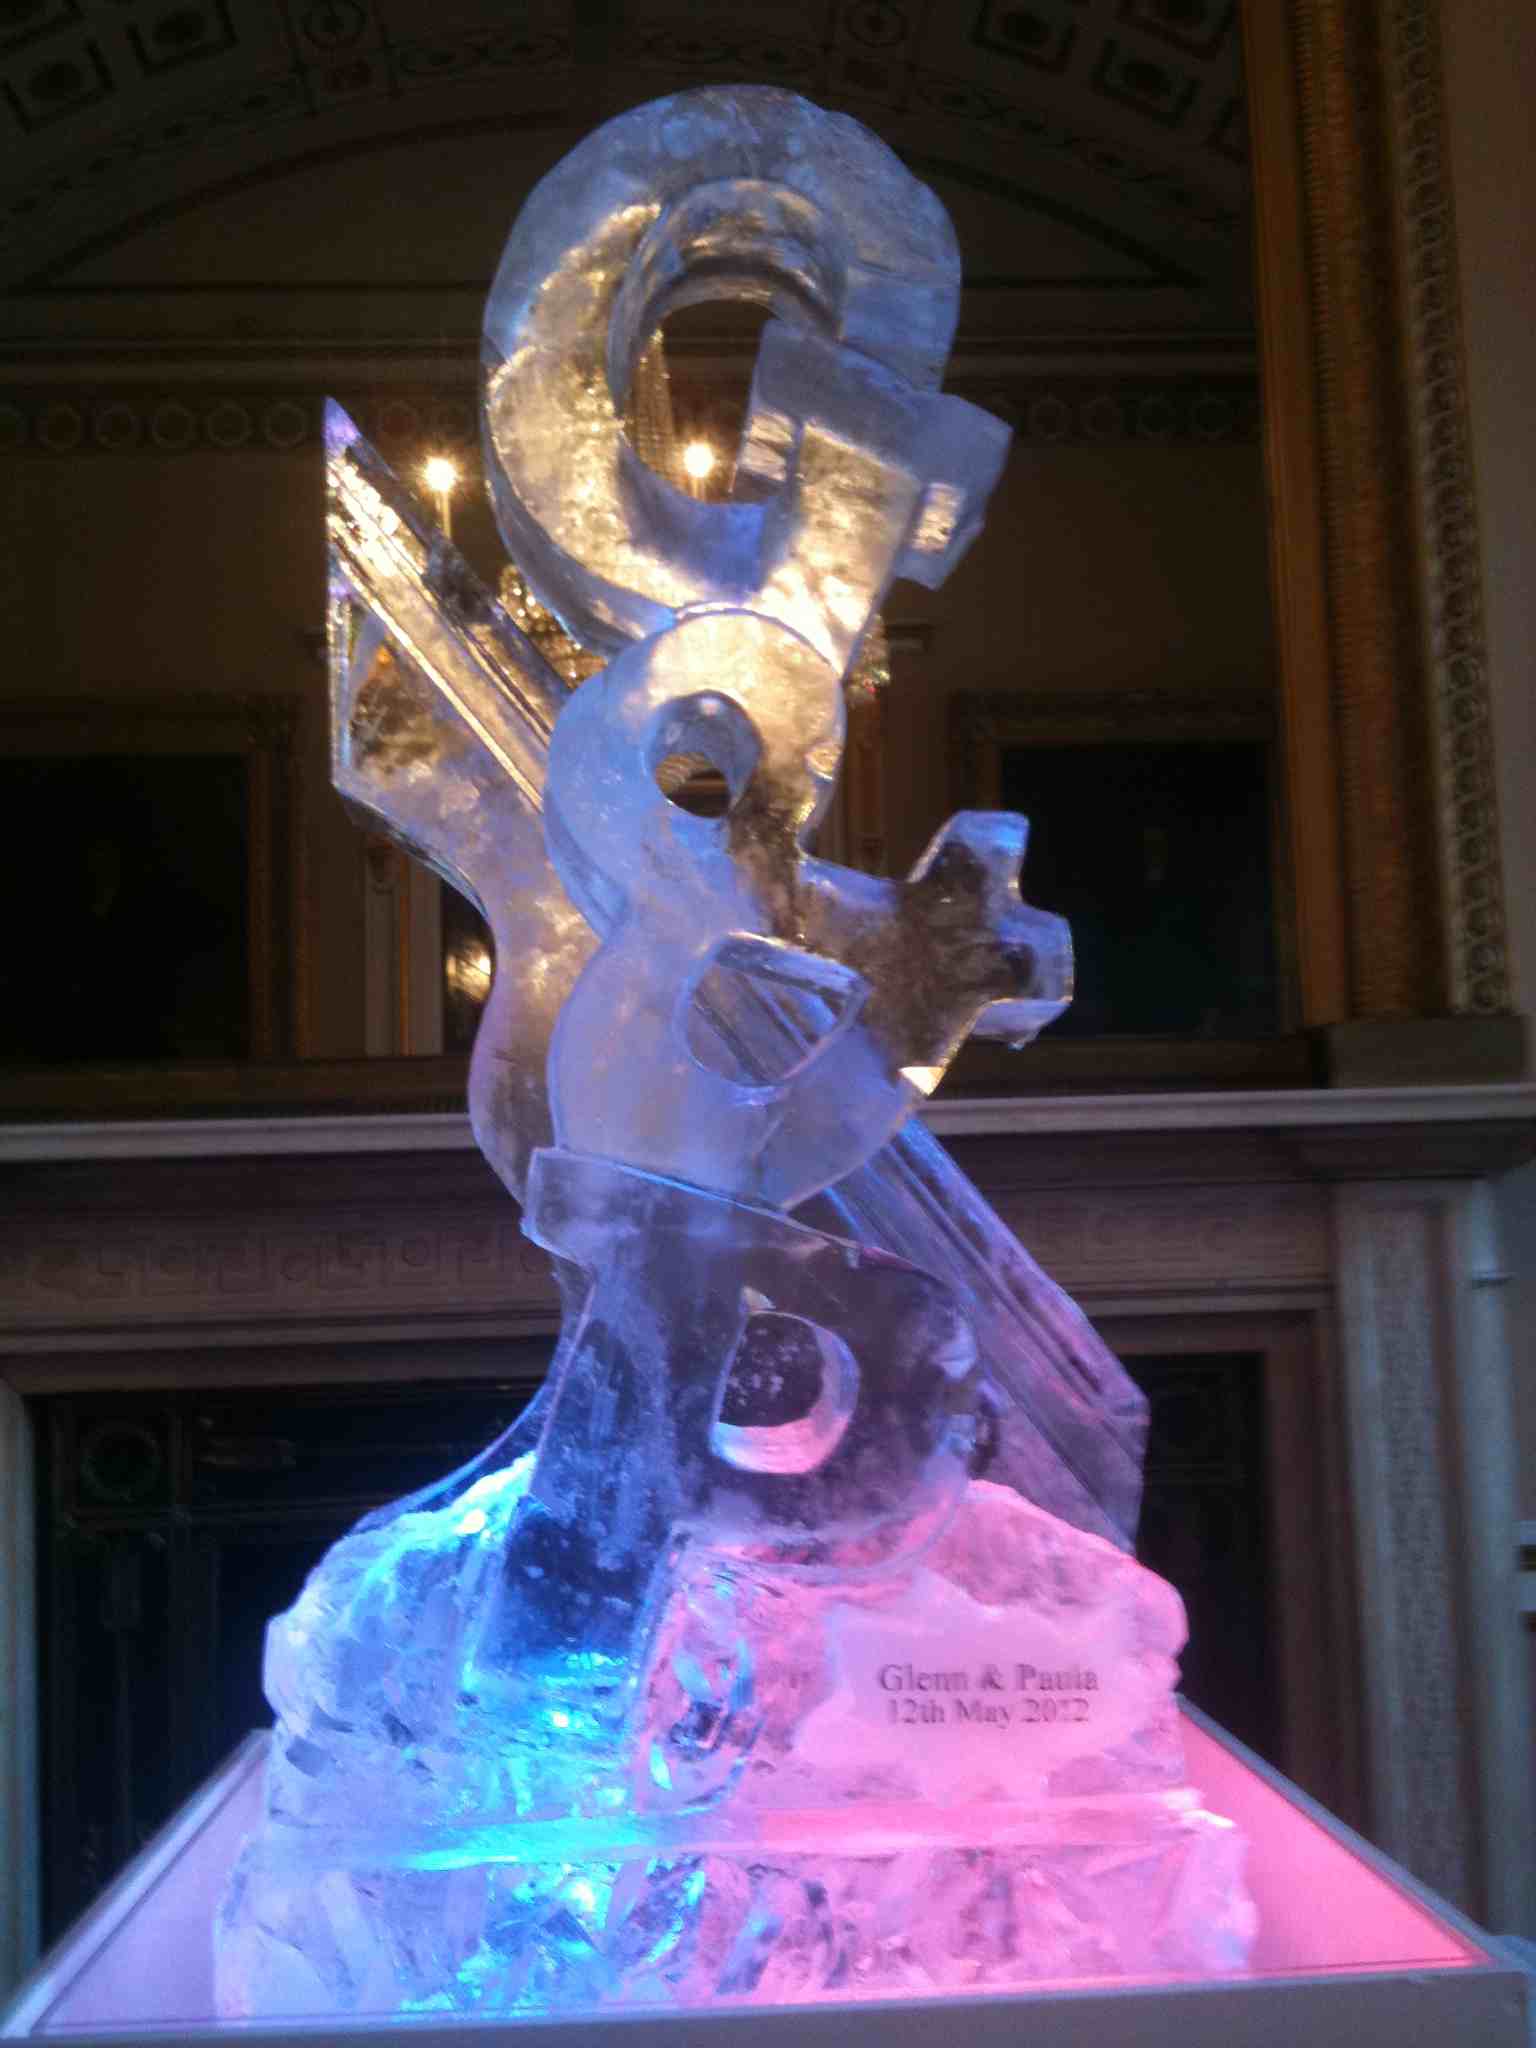 Elegant and complex large ice sculpture at a wedding